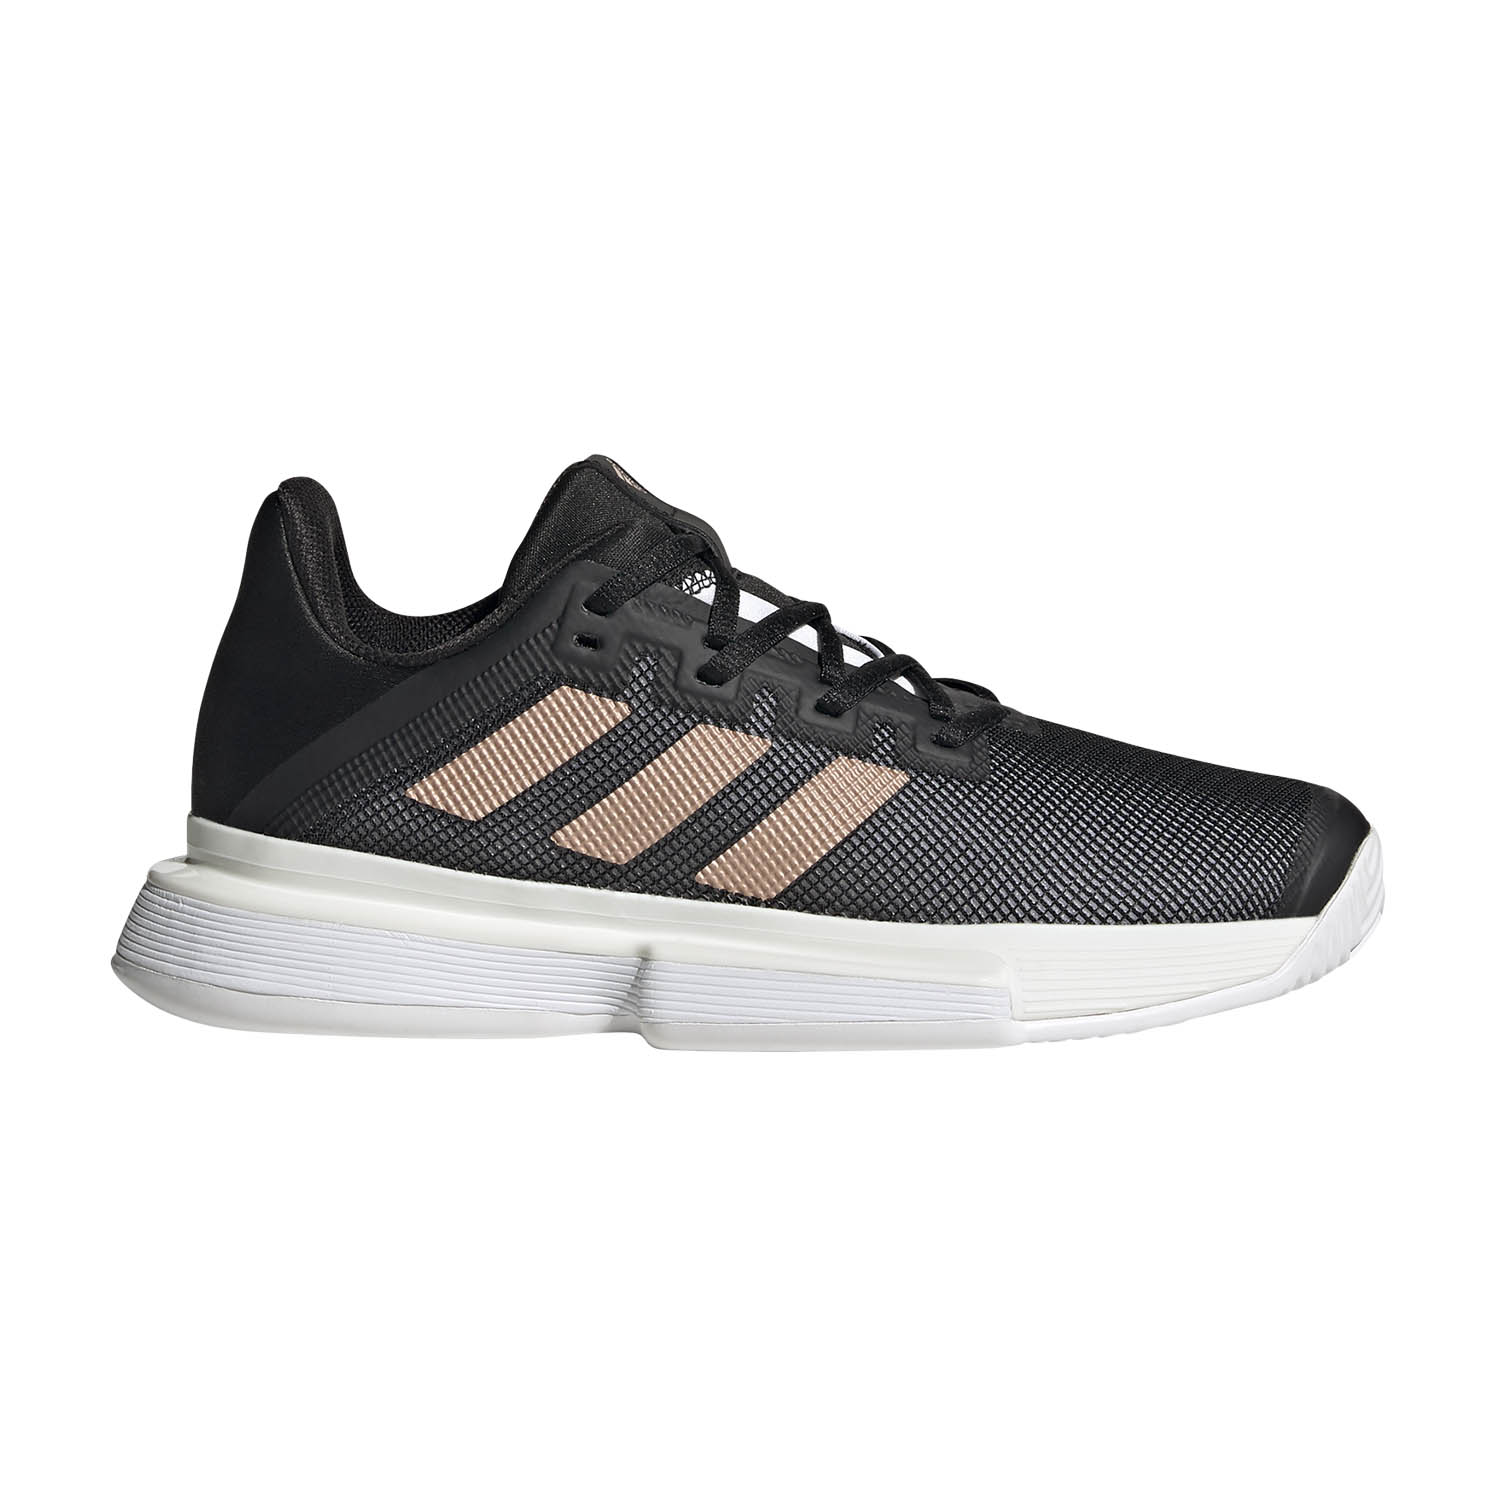 adidas women's solematch bounce tennis shoes